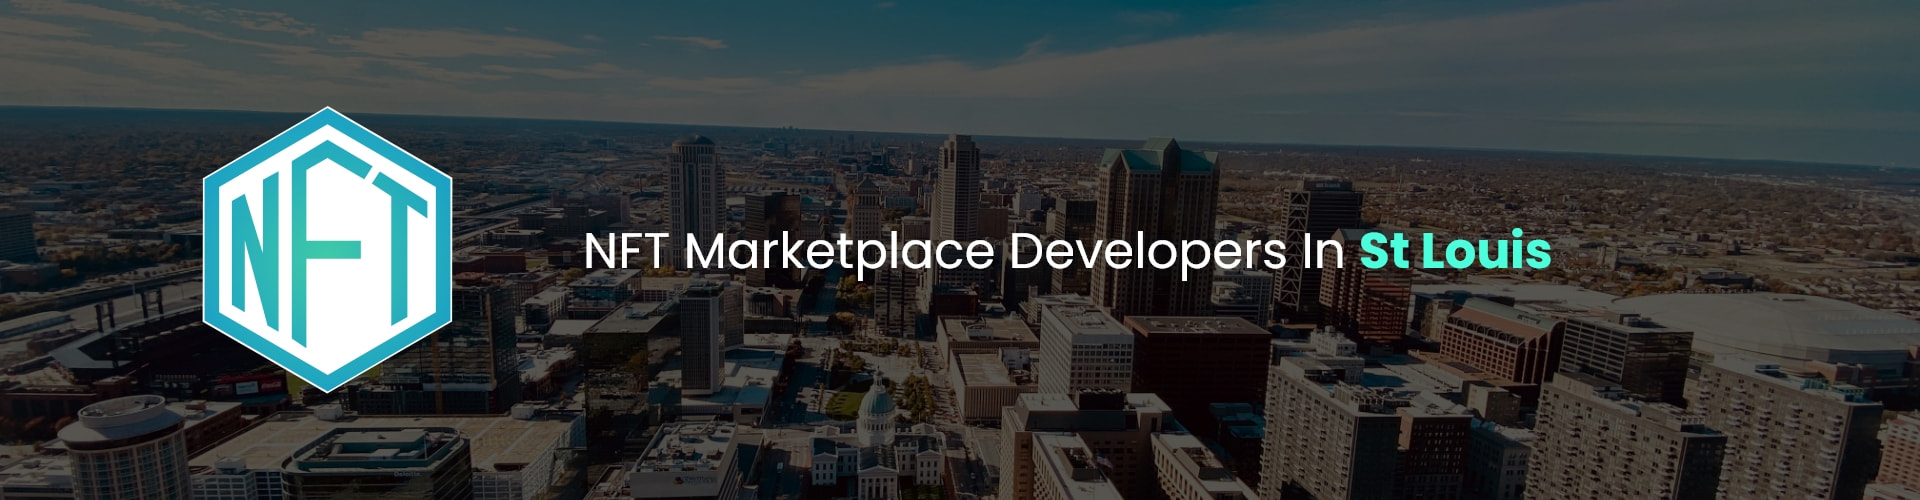 hire nft marketplace developers in st louis